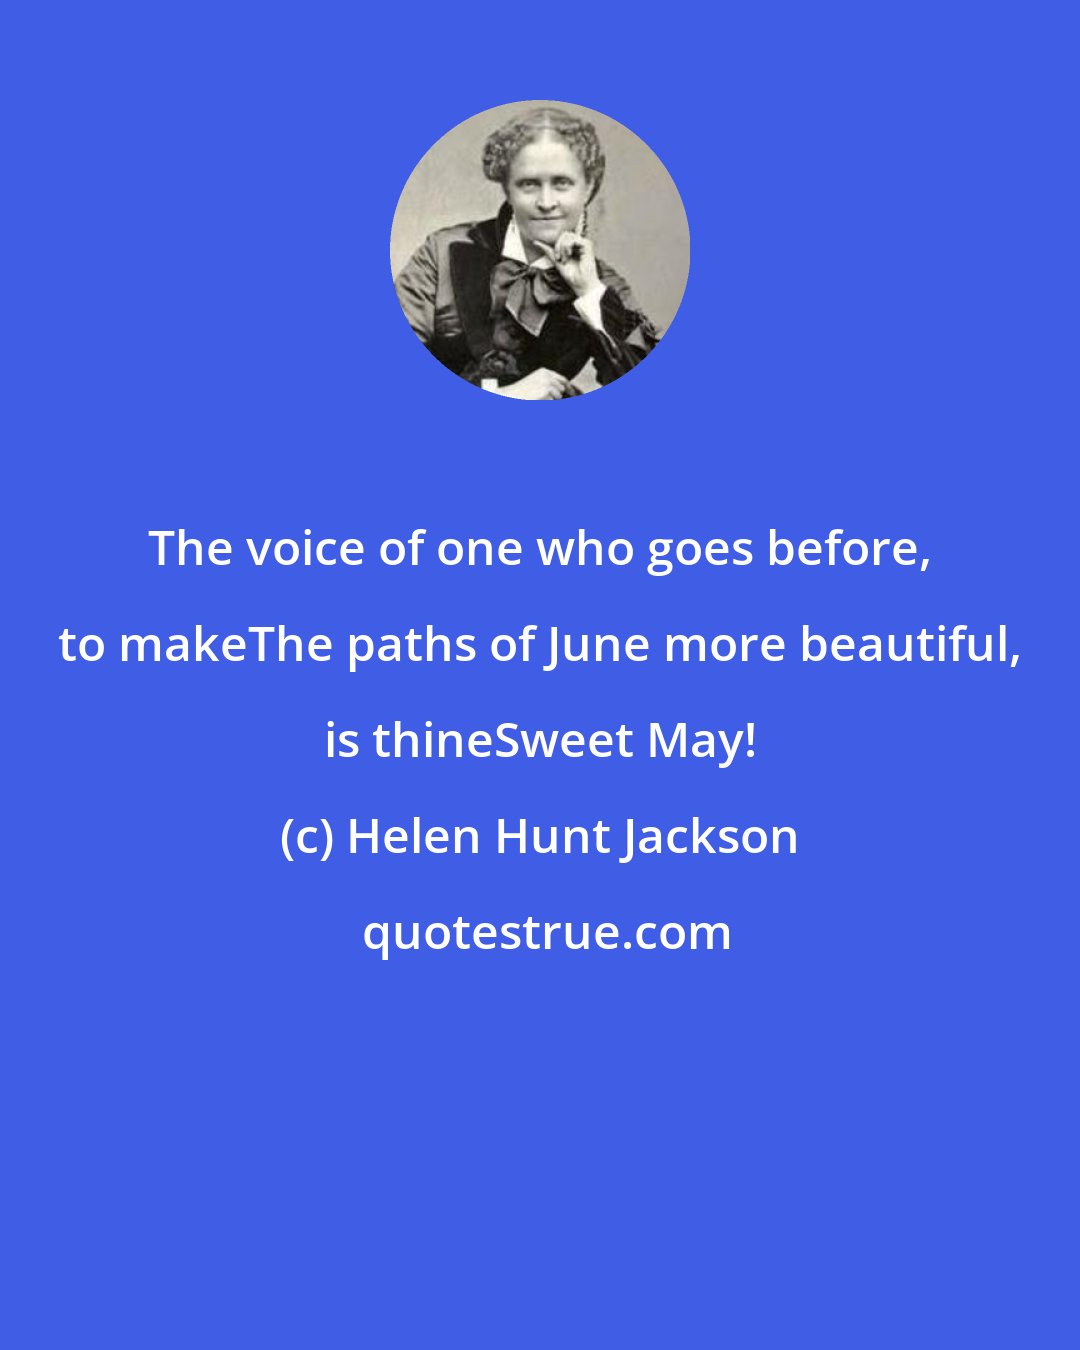 Helen Hunt Jackson: The voice of one who goes before, to makeThe paths of June more beautiful, is thineSweet May!